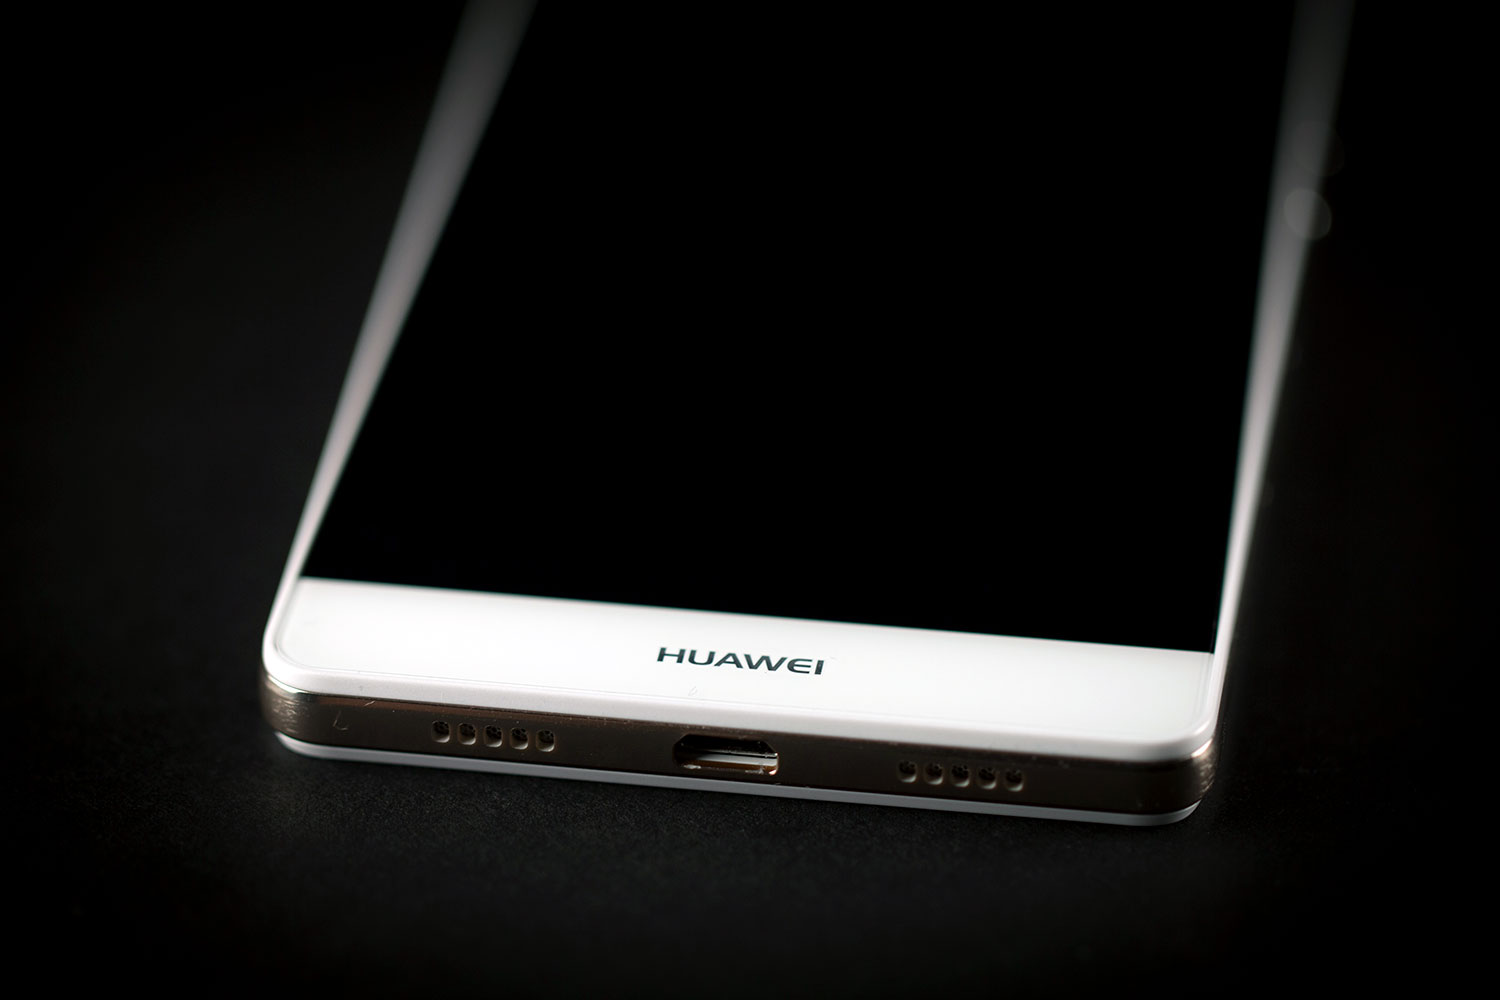 Huawei P8 lite Review | Trends